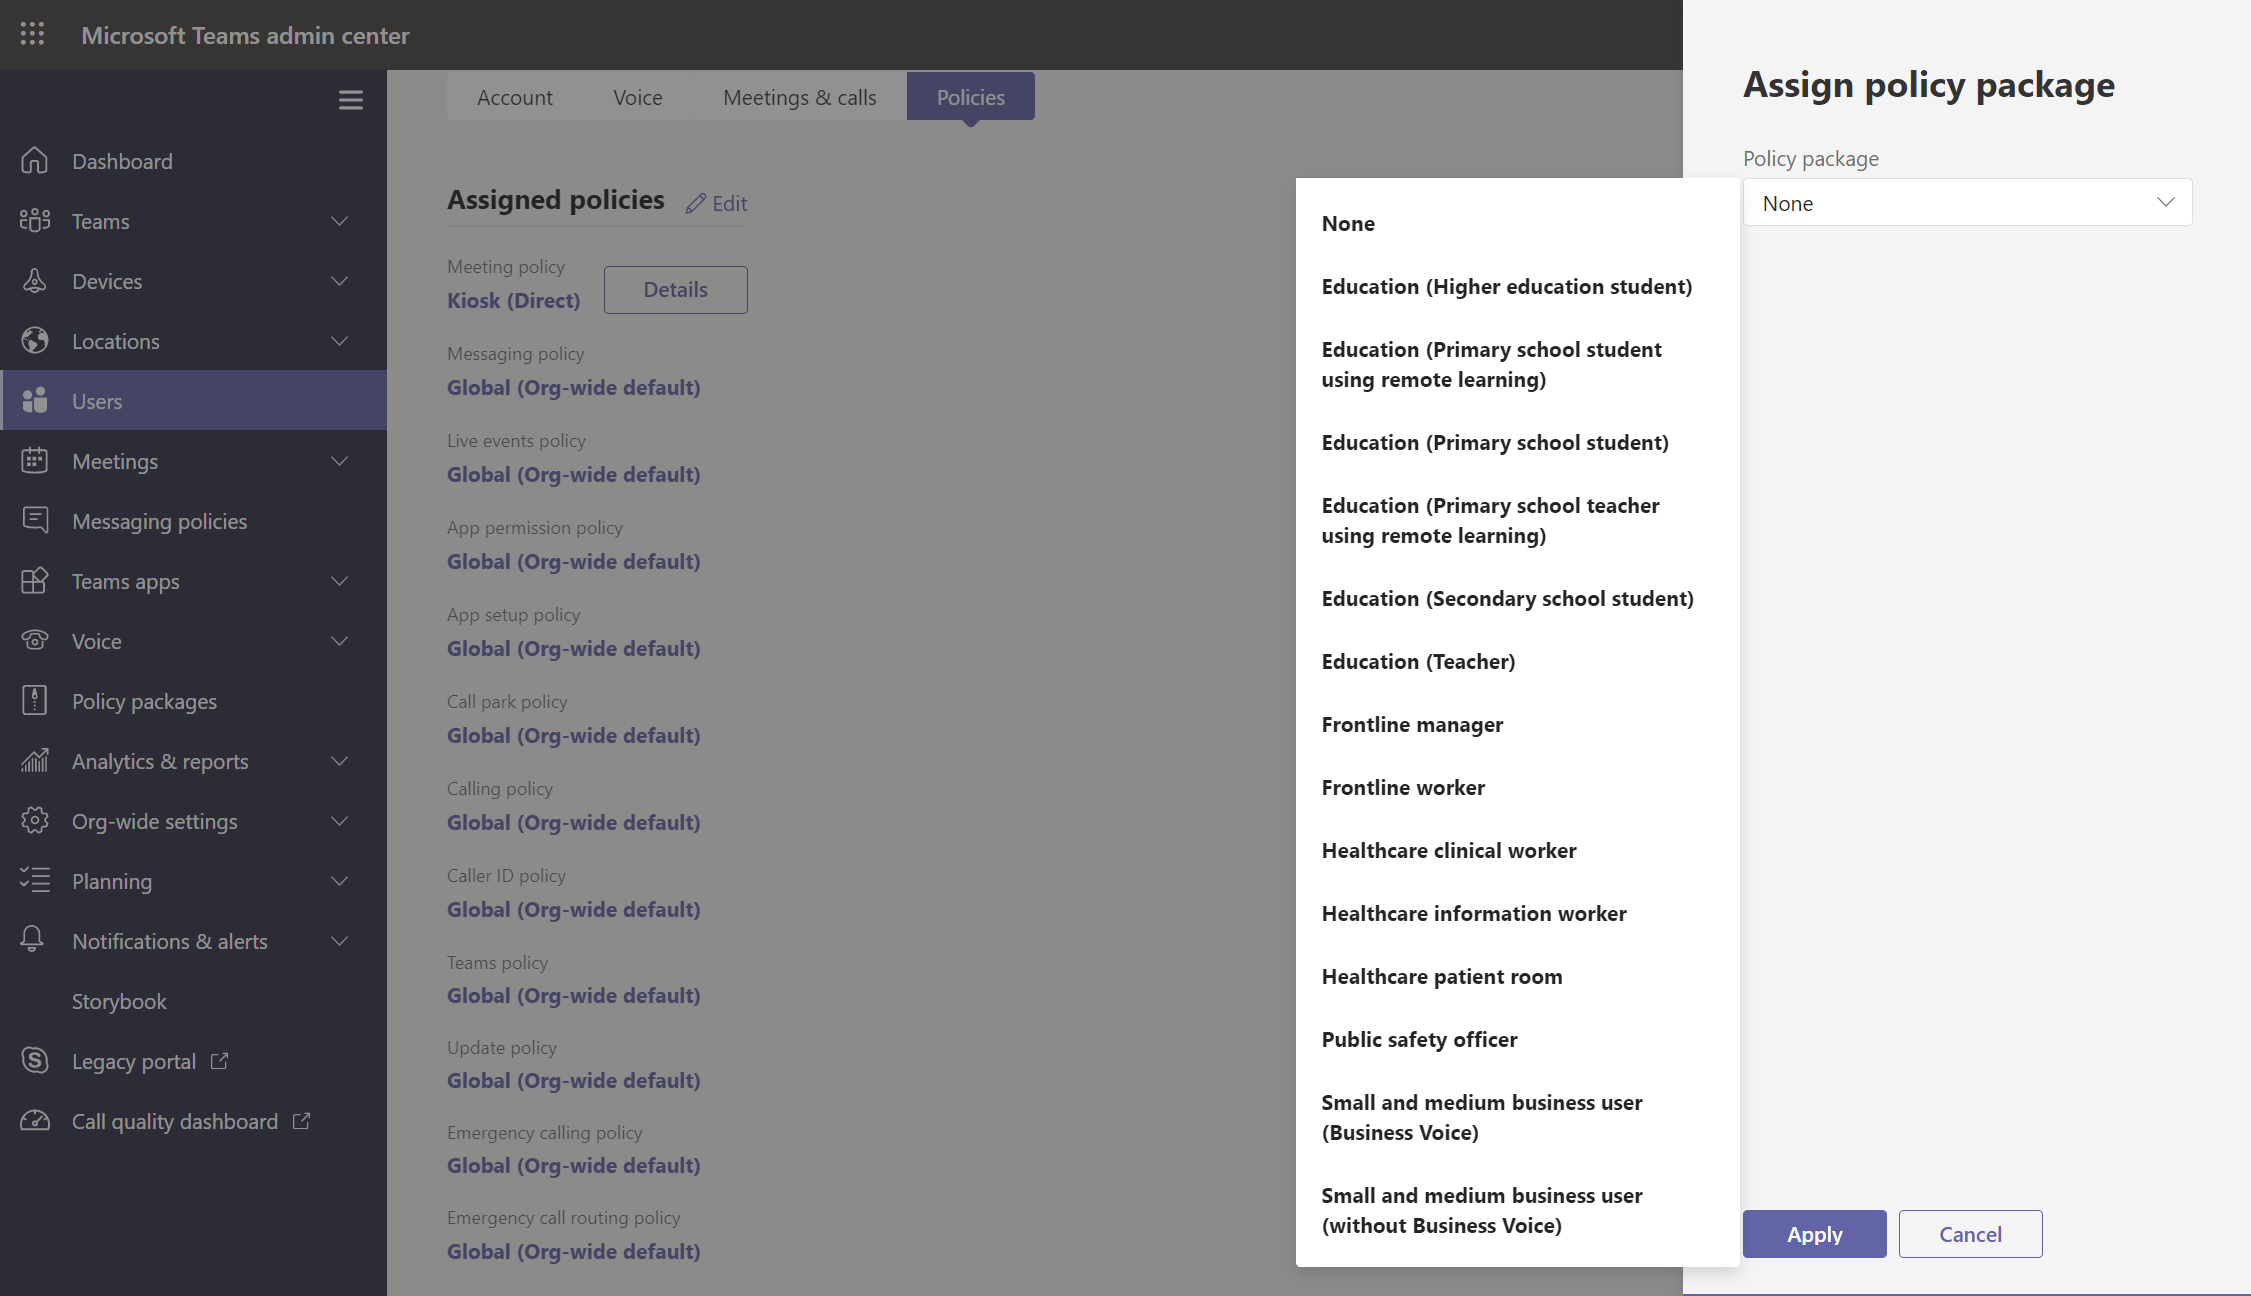 Teams admin center screenshot for policy package assignment to a user.